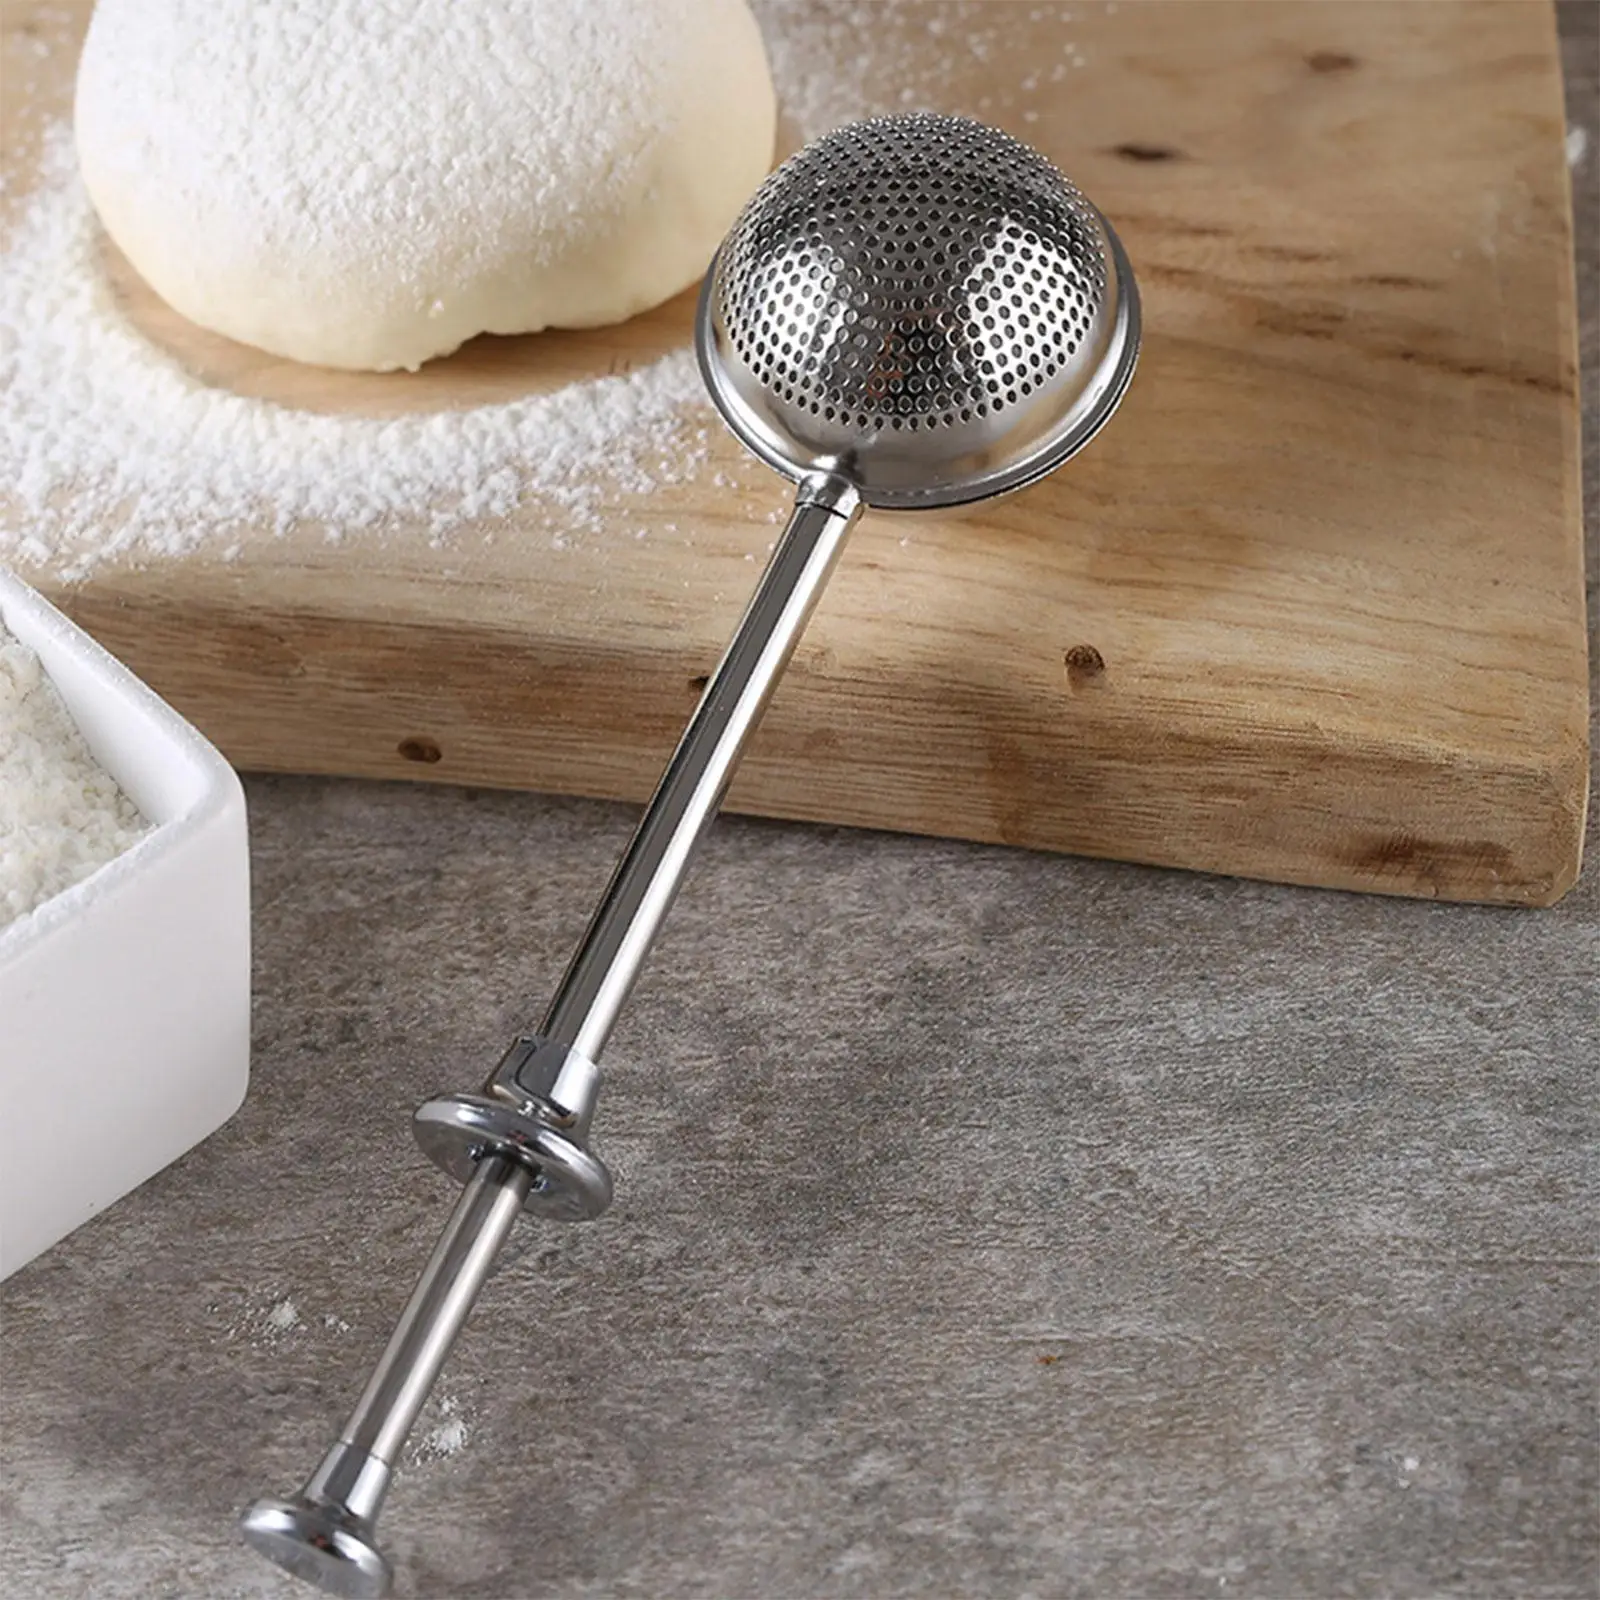 Stainless Steel Flour Sieve Dishwasher Safe Manual Telescopic Powder Spreader for Pastry Cake Decor Tool Home Kitchen Baking